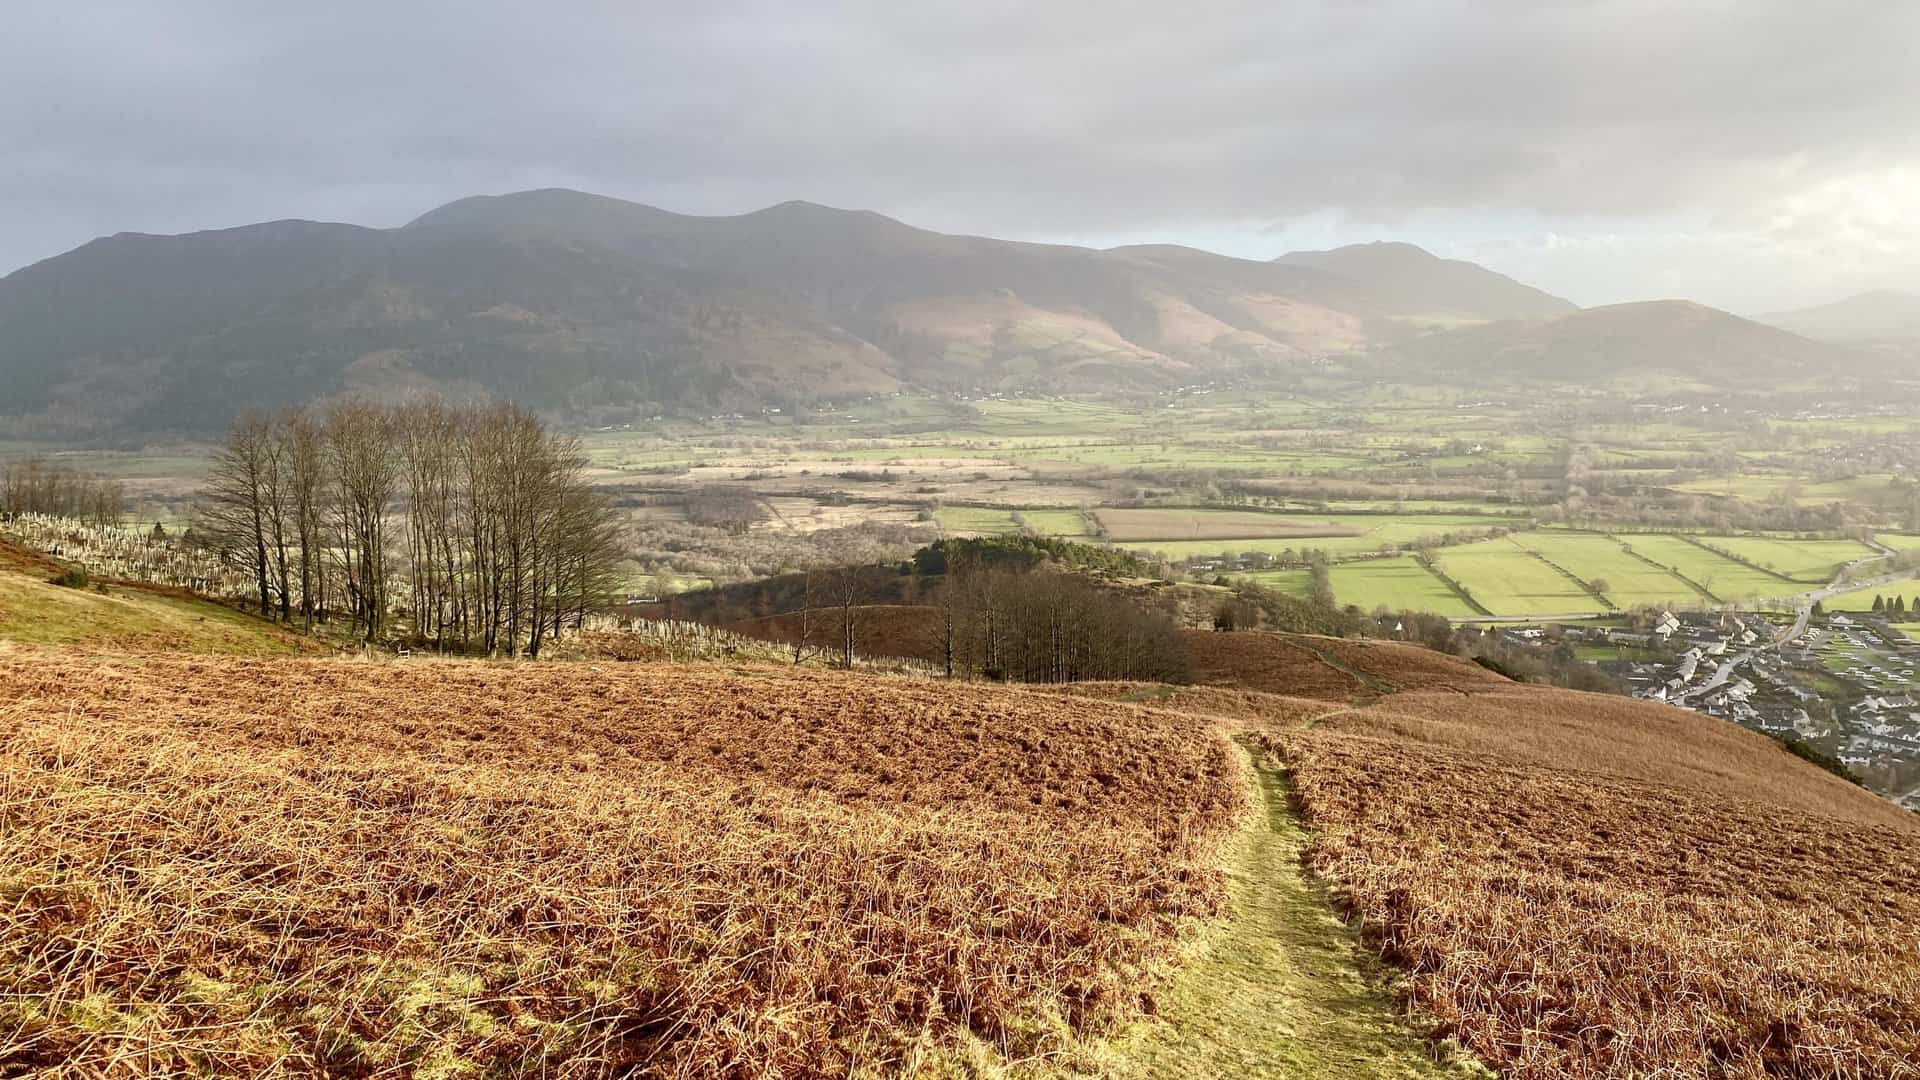 Looking back at the Skiddaw range of mountains to the north-east. The smaller hill on the far right is Latrigg which overlooks Keswick.